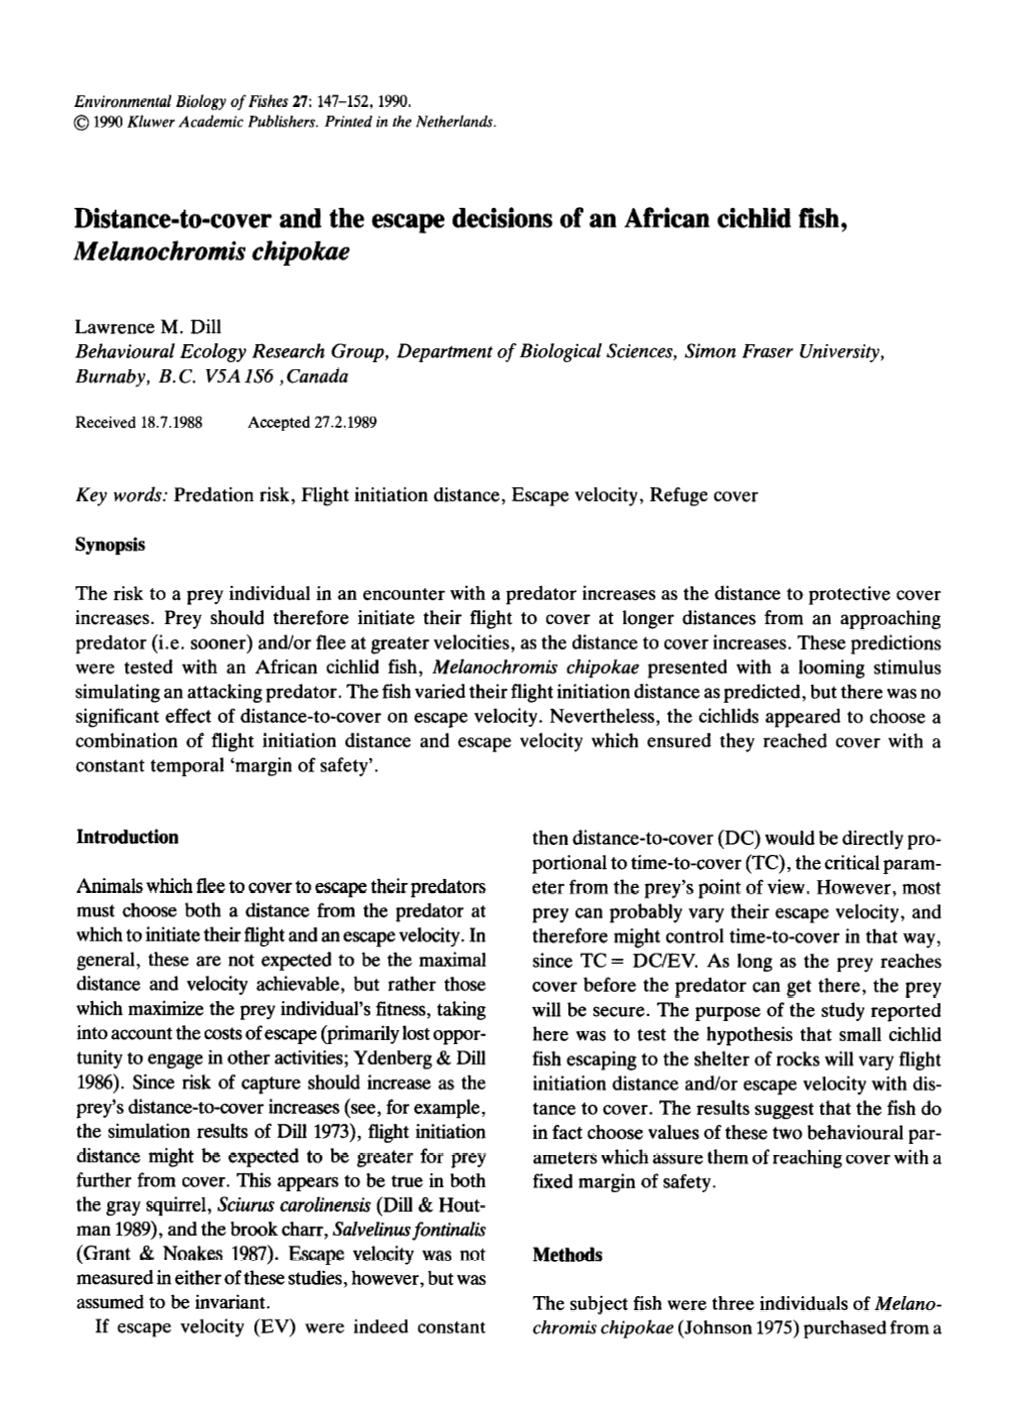 Distance-To-Cover and the Escape Decisions of an African Cichlid Fish